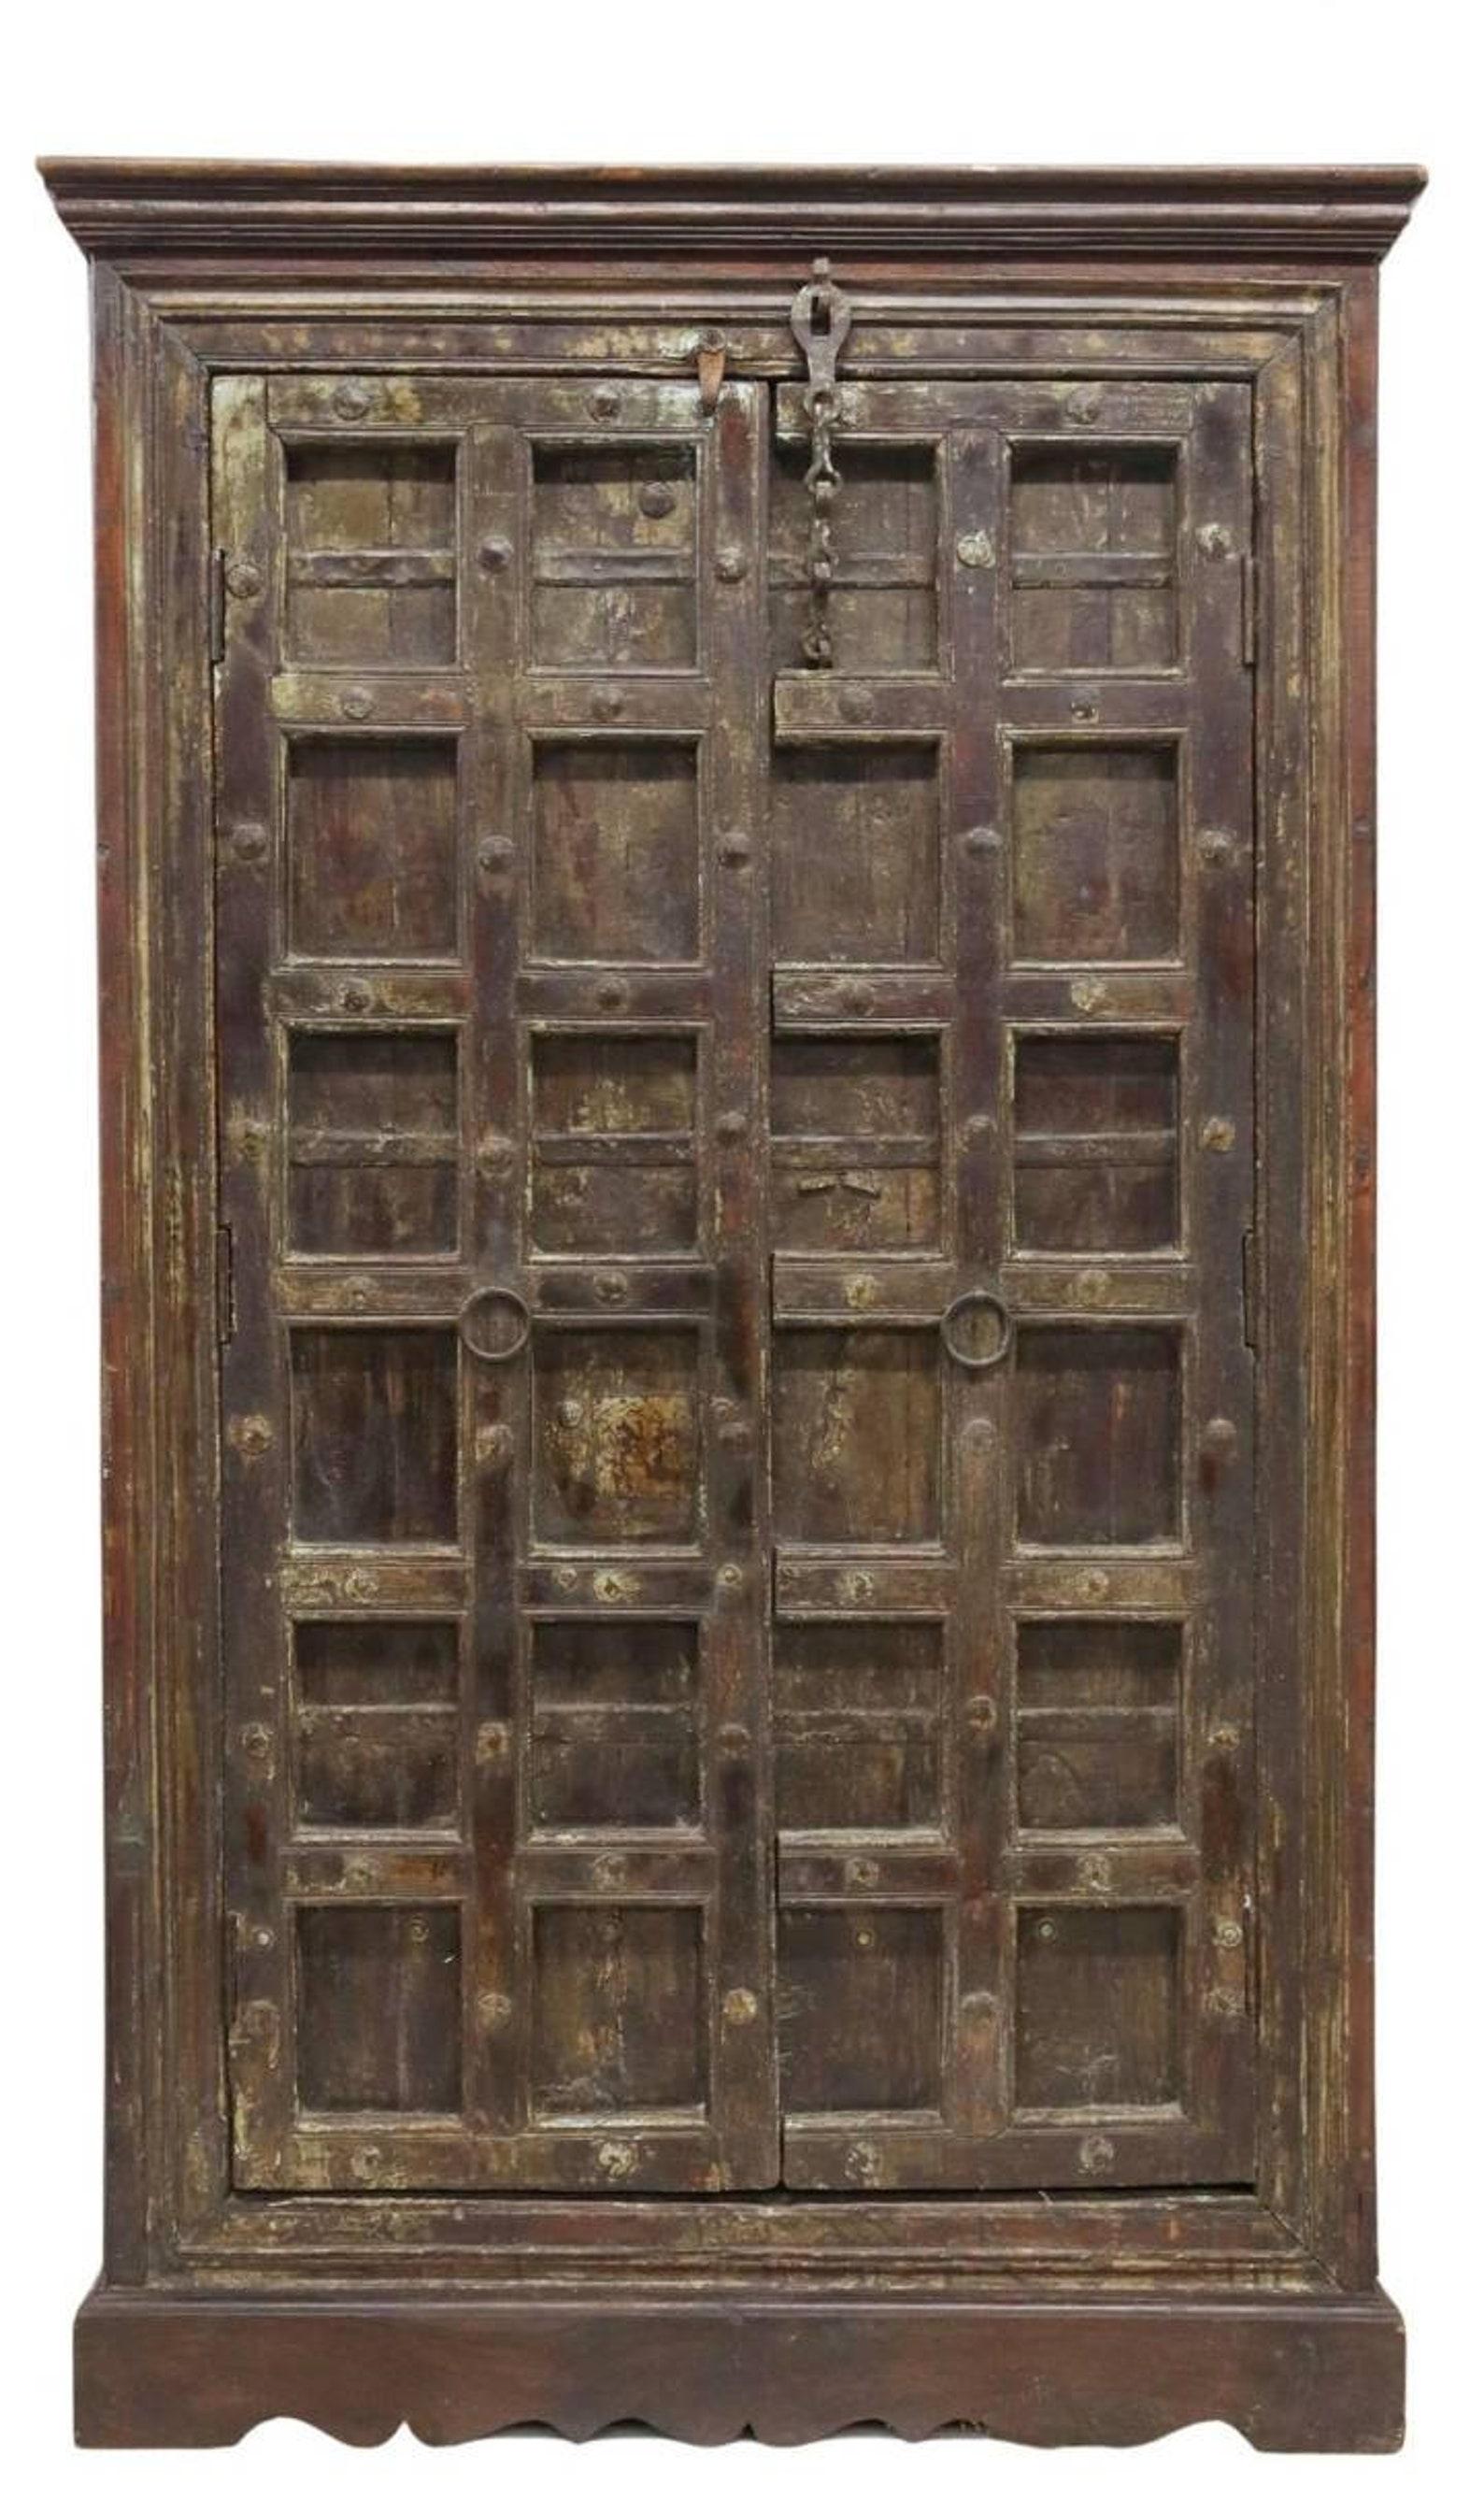 A large and most impressive Indian armoire / cupboard with dark heavily distressed patina.

Born in India in the early 20th century, featuring rustic handmade craftsmanship, solid wood construction, with older reclaimed antique ironwork elements